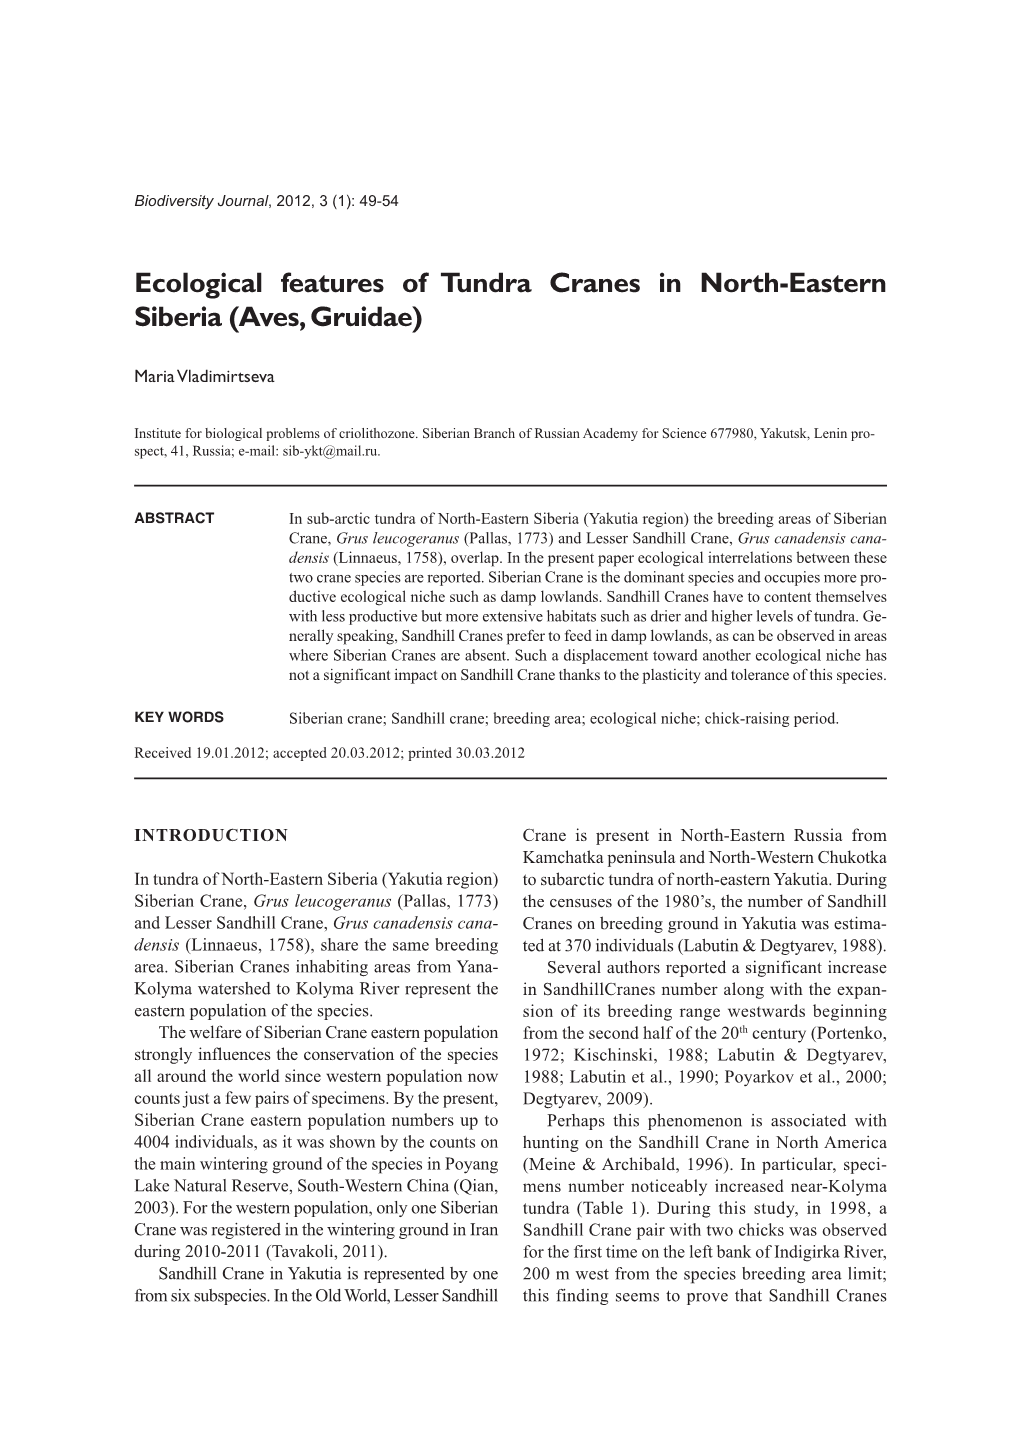 Ecological Features of Tundra Cranes in North-Eastern Siberia (Aves, Gruidae)